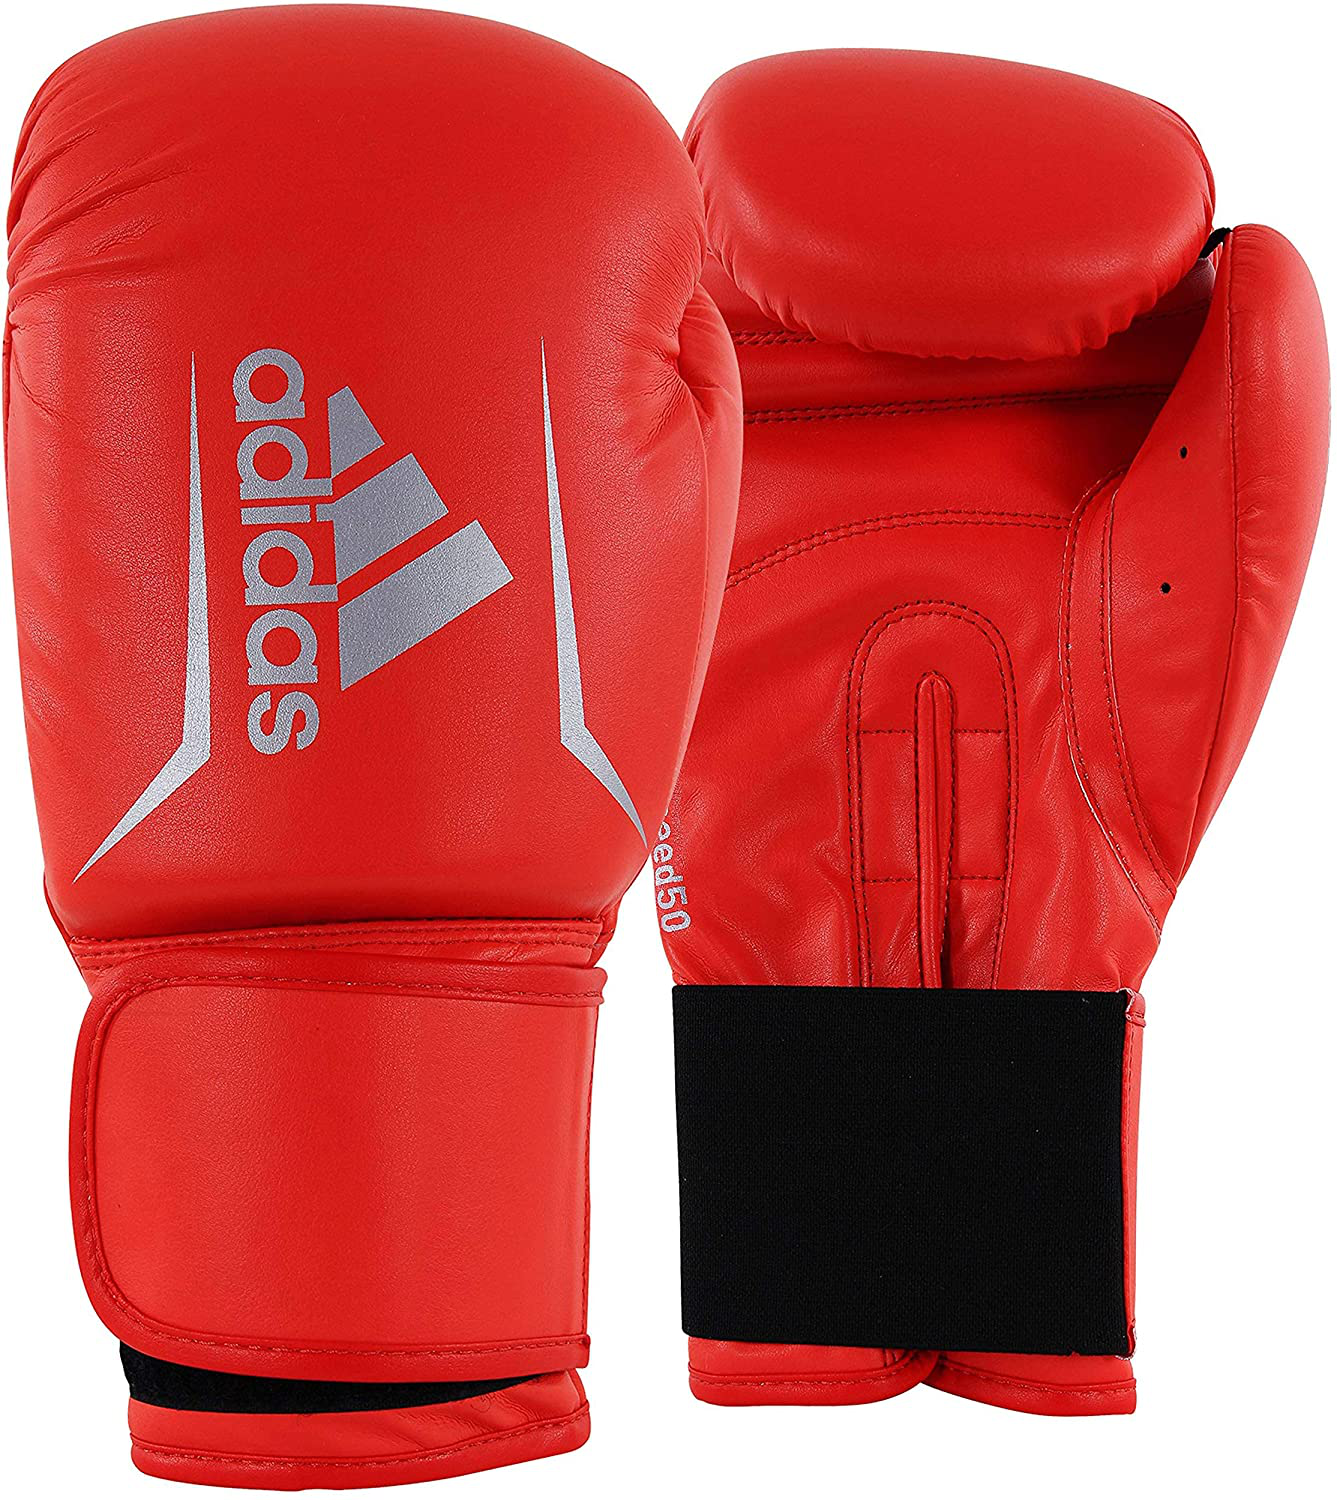 Boxing & FLX Kickboxing 50 for 3.0 Gloves Boxing Adidas — Speed FightersShop Men/Wome